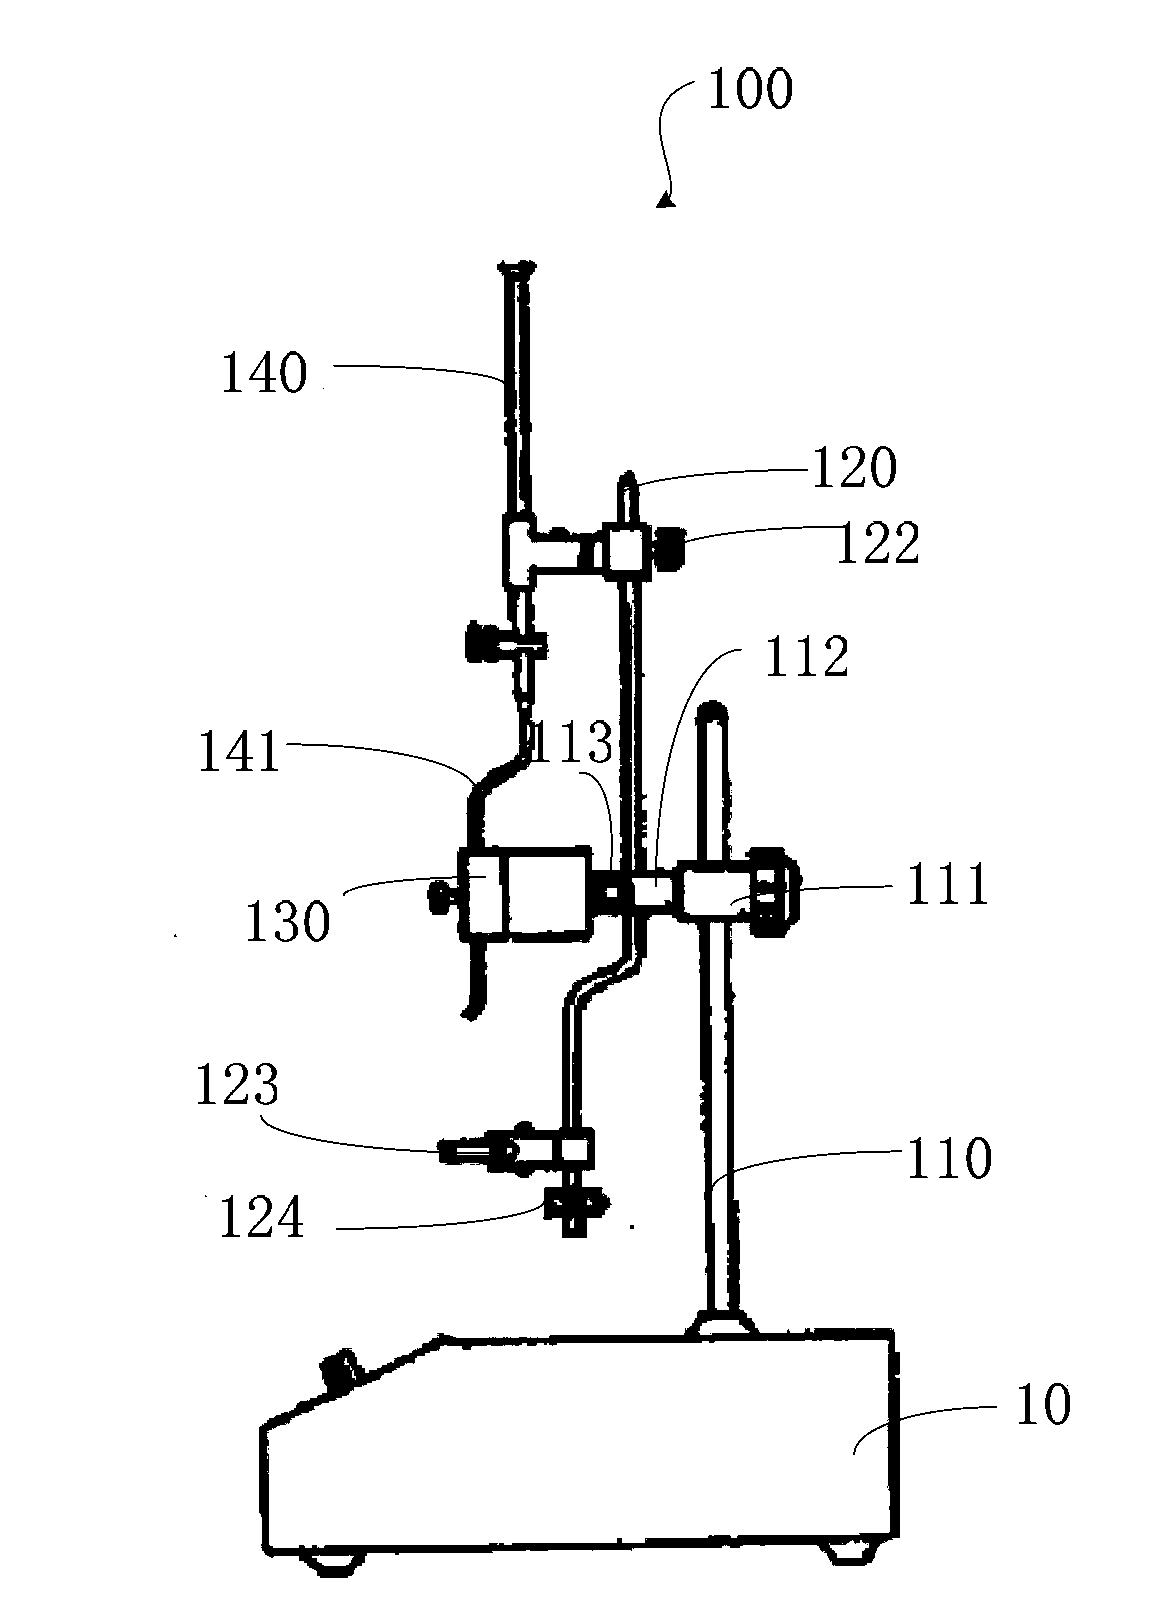 Titrating device of potentiometric titrator